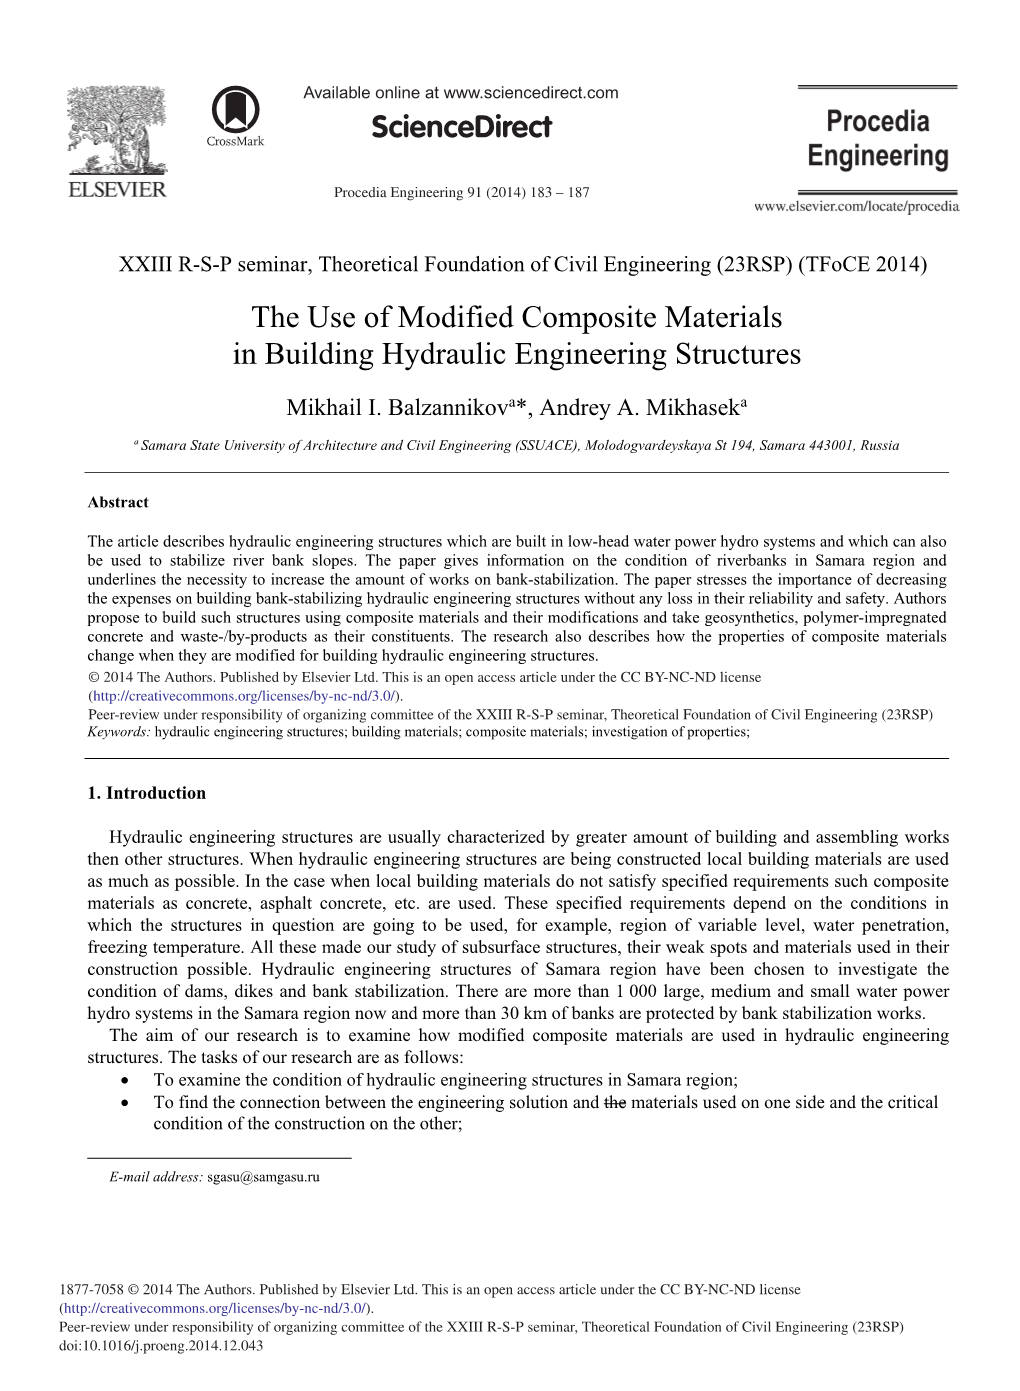 The Use of Modified Composite Materials in Building Hydraulic Engineering Structures